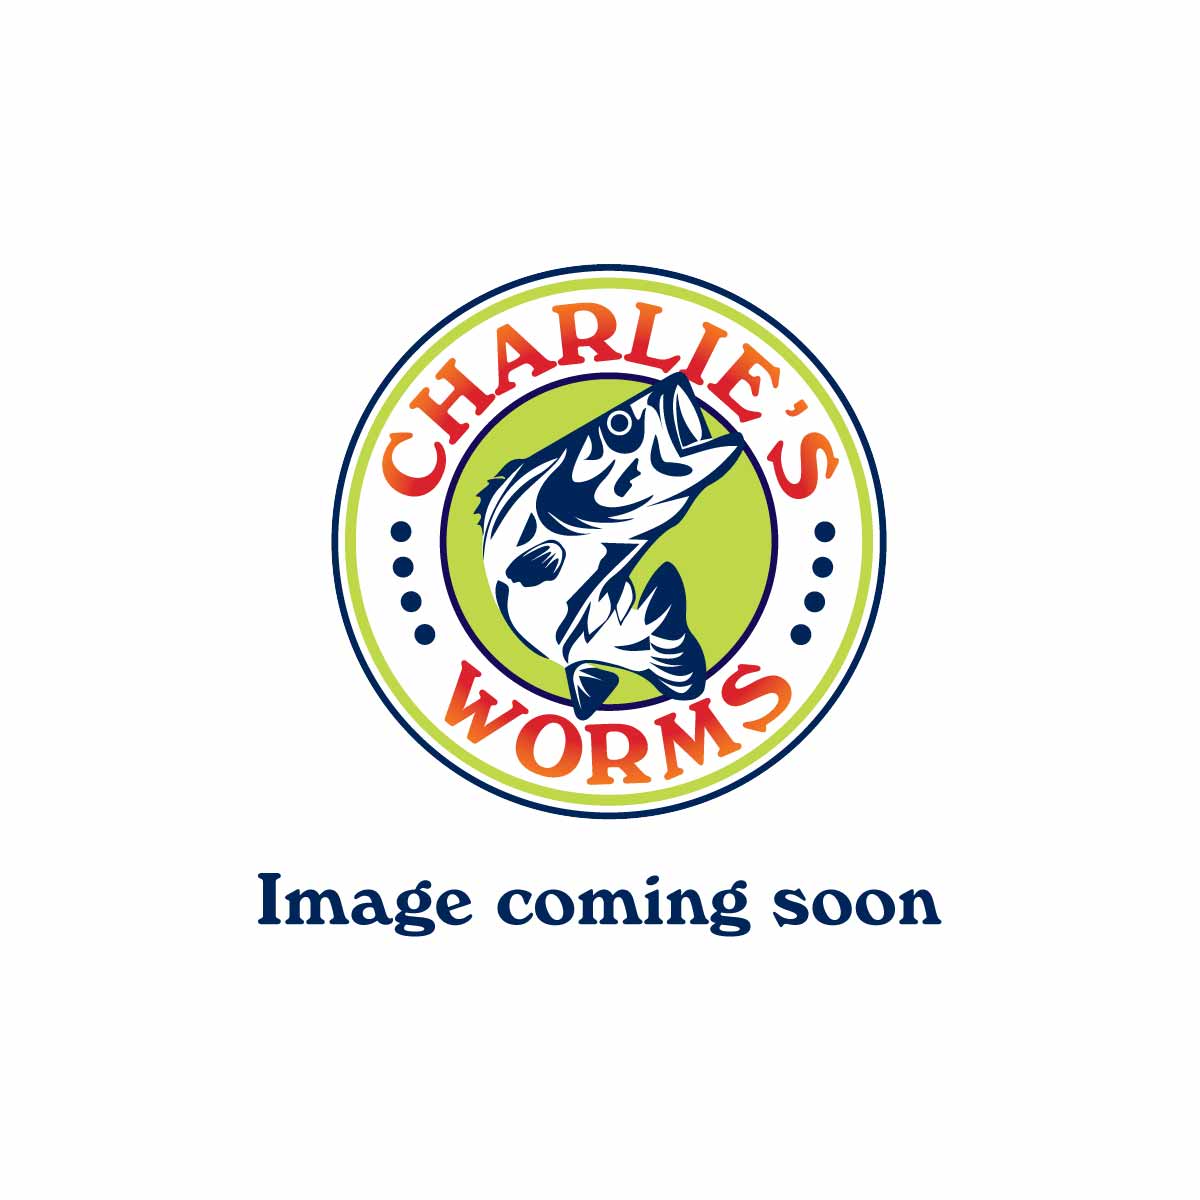 charlie's worms product image coming soon